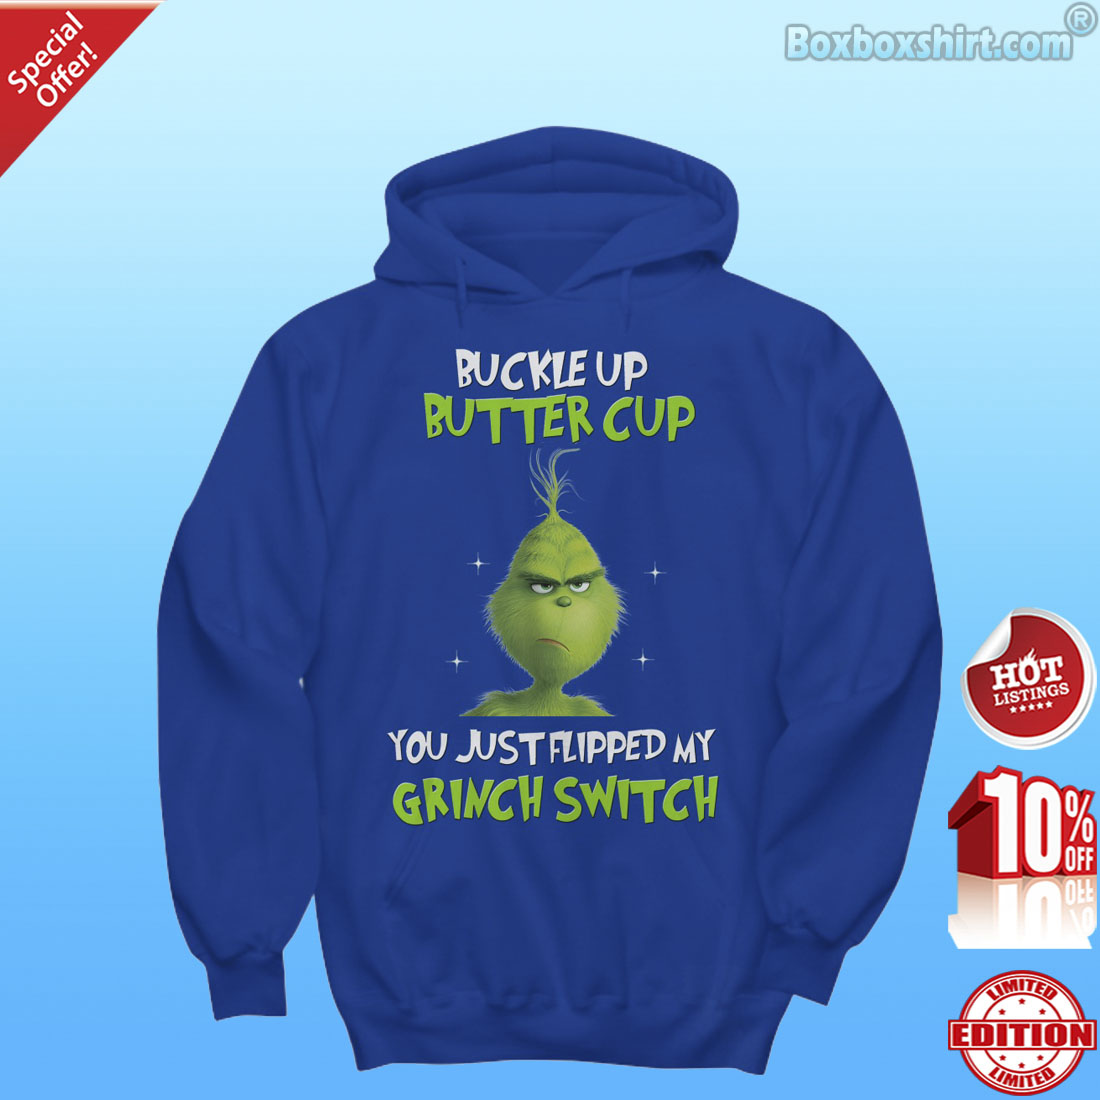 Buckle up butter cup you just flipped my Grinch switch shirt